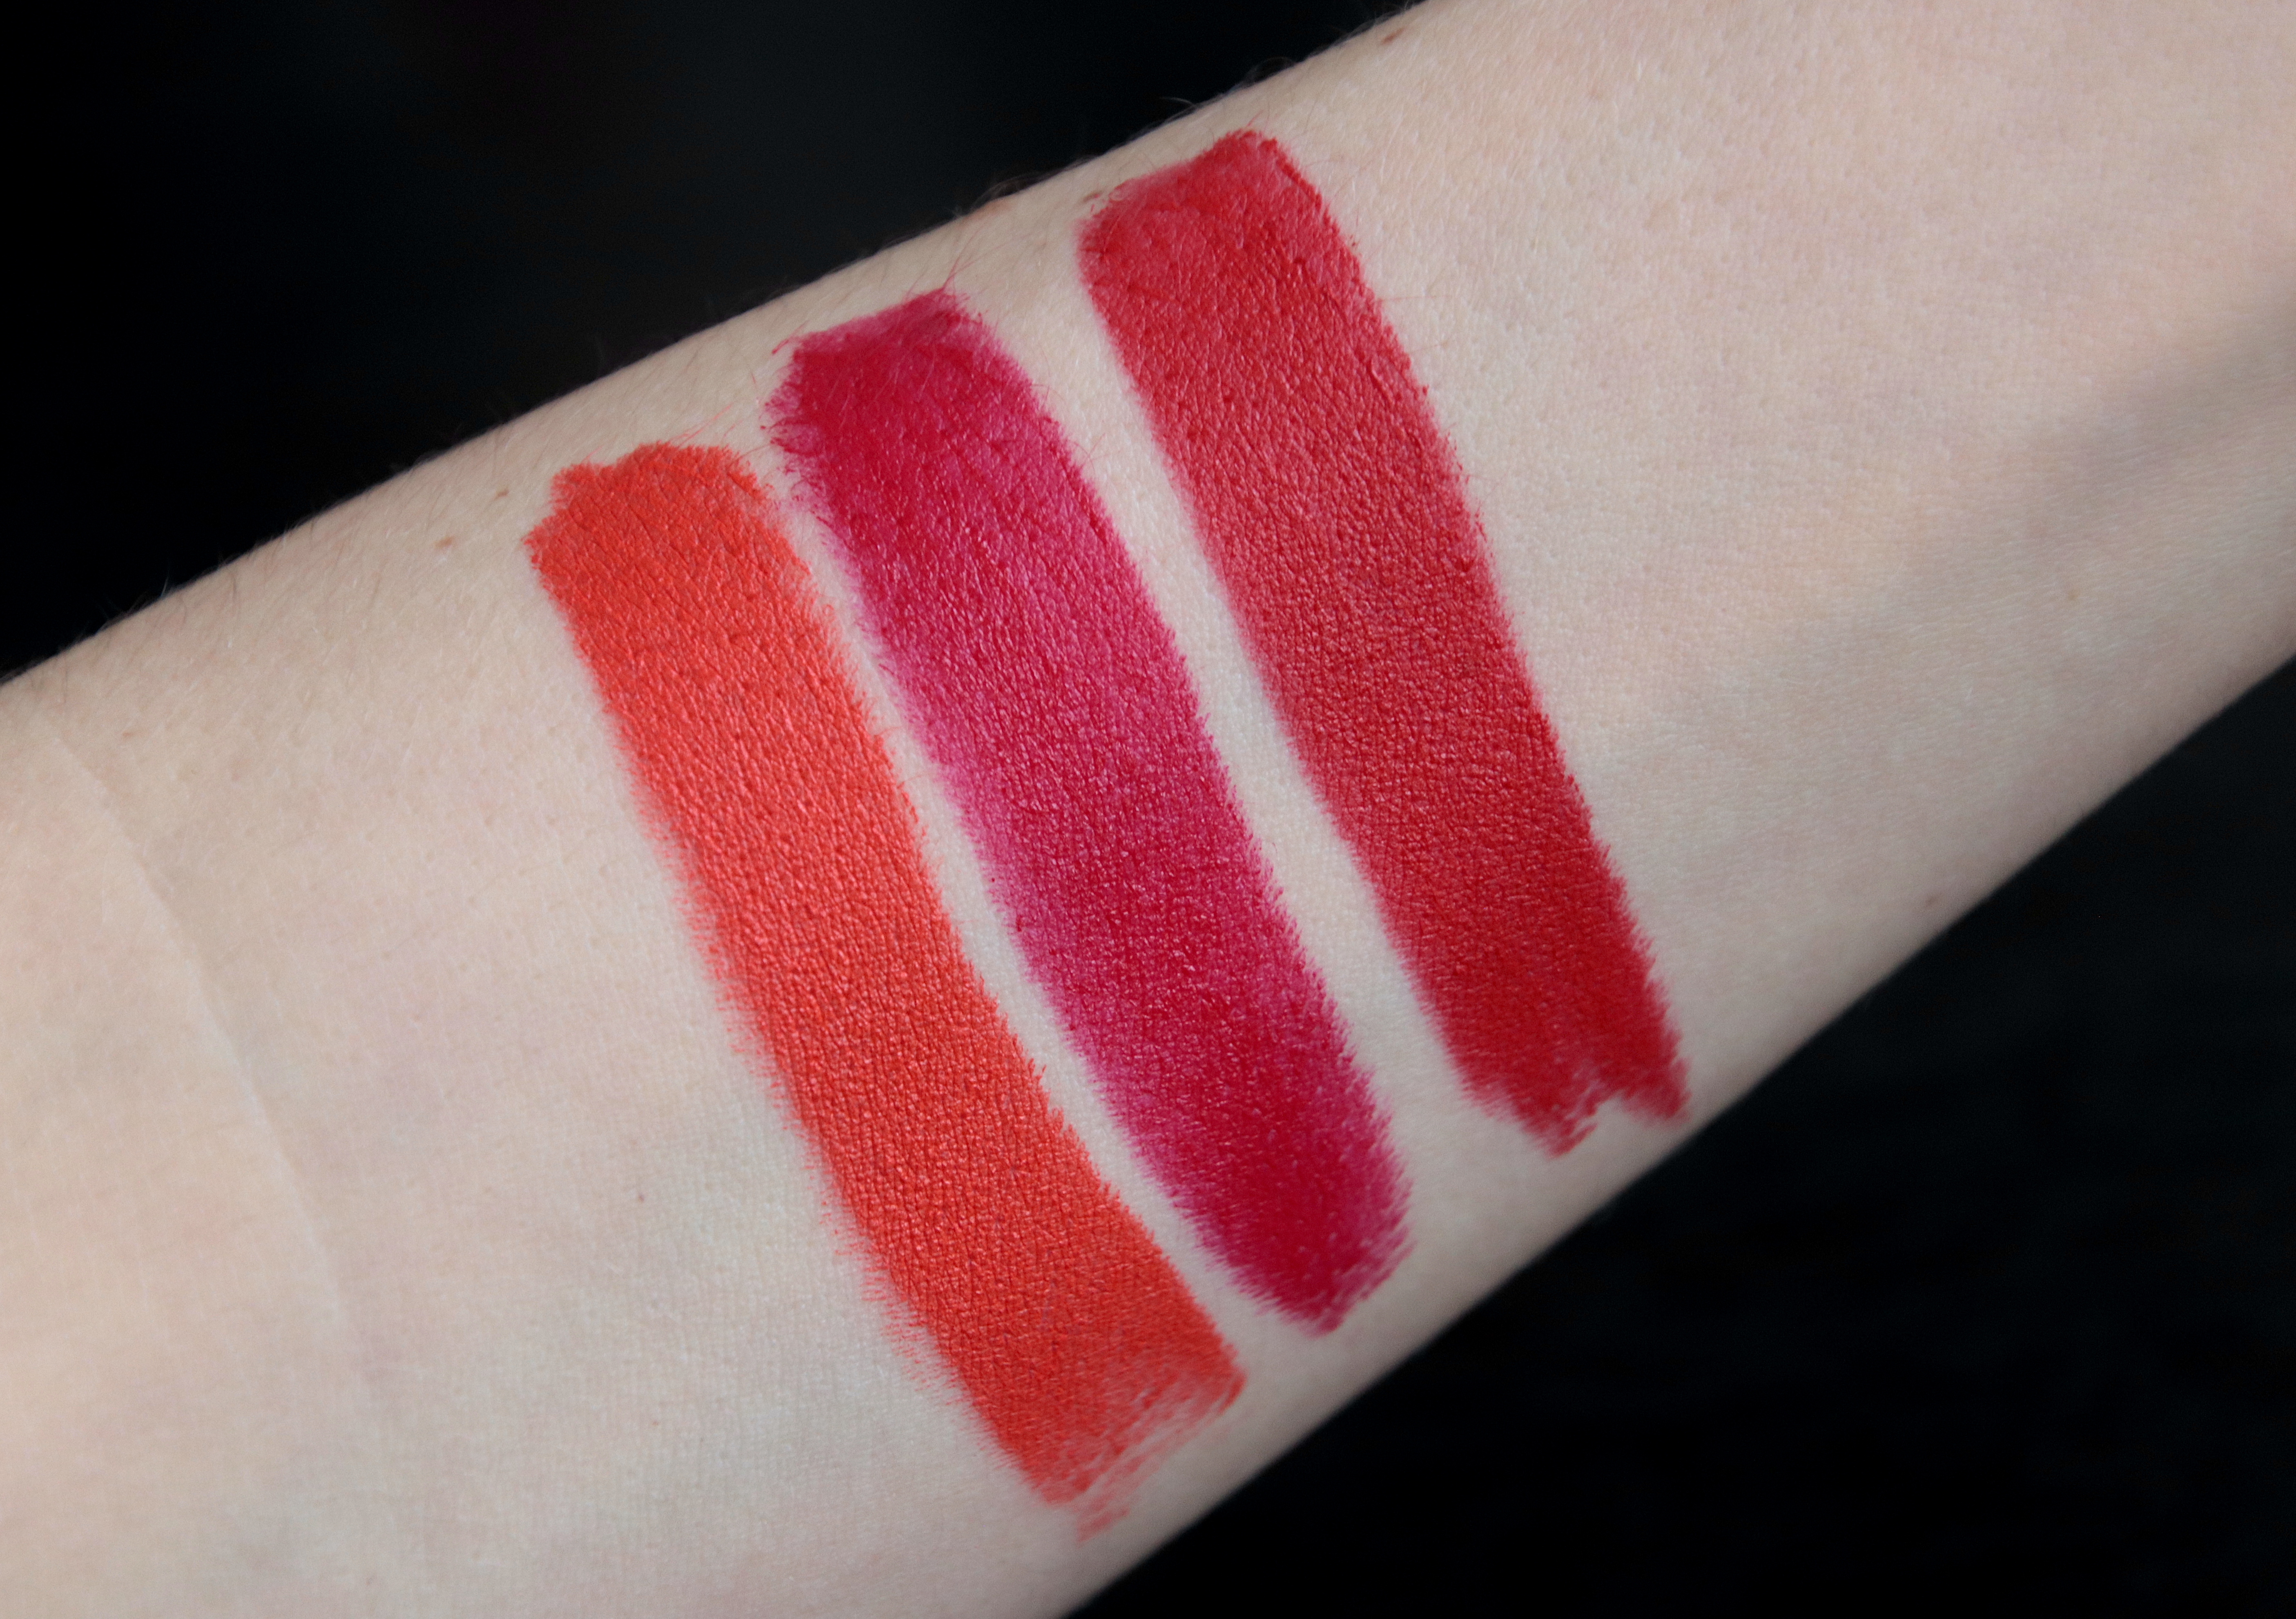 Carolina Herrera Rouge Mat 472 cheering pink 410 red alegria 480 almoust coral swatch